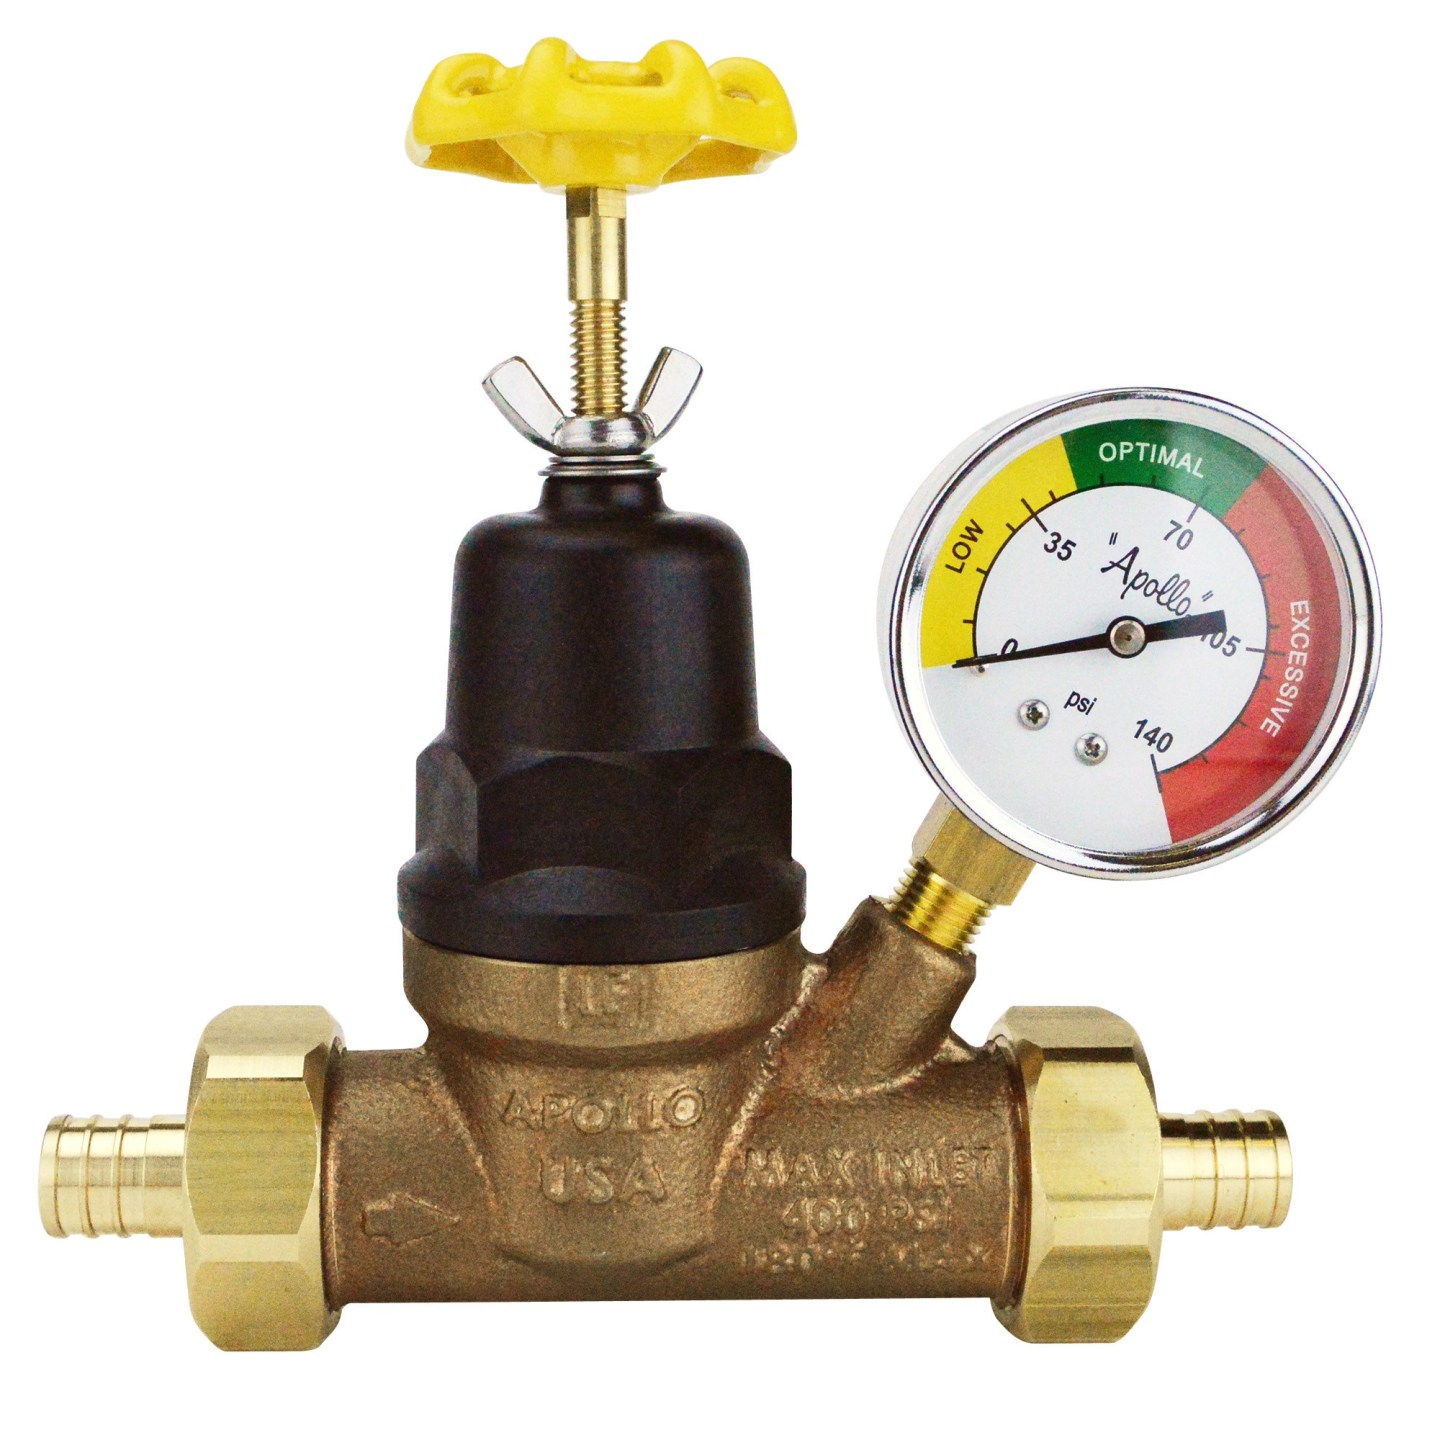 APXPRV34WG Pressure Reducing Valve with Gauge, 3/4 in Connection, PEX Barb, 15 to 75 psi Regulating, 27 gpm